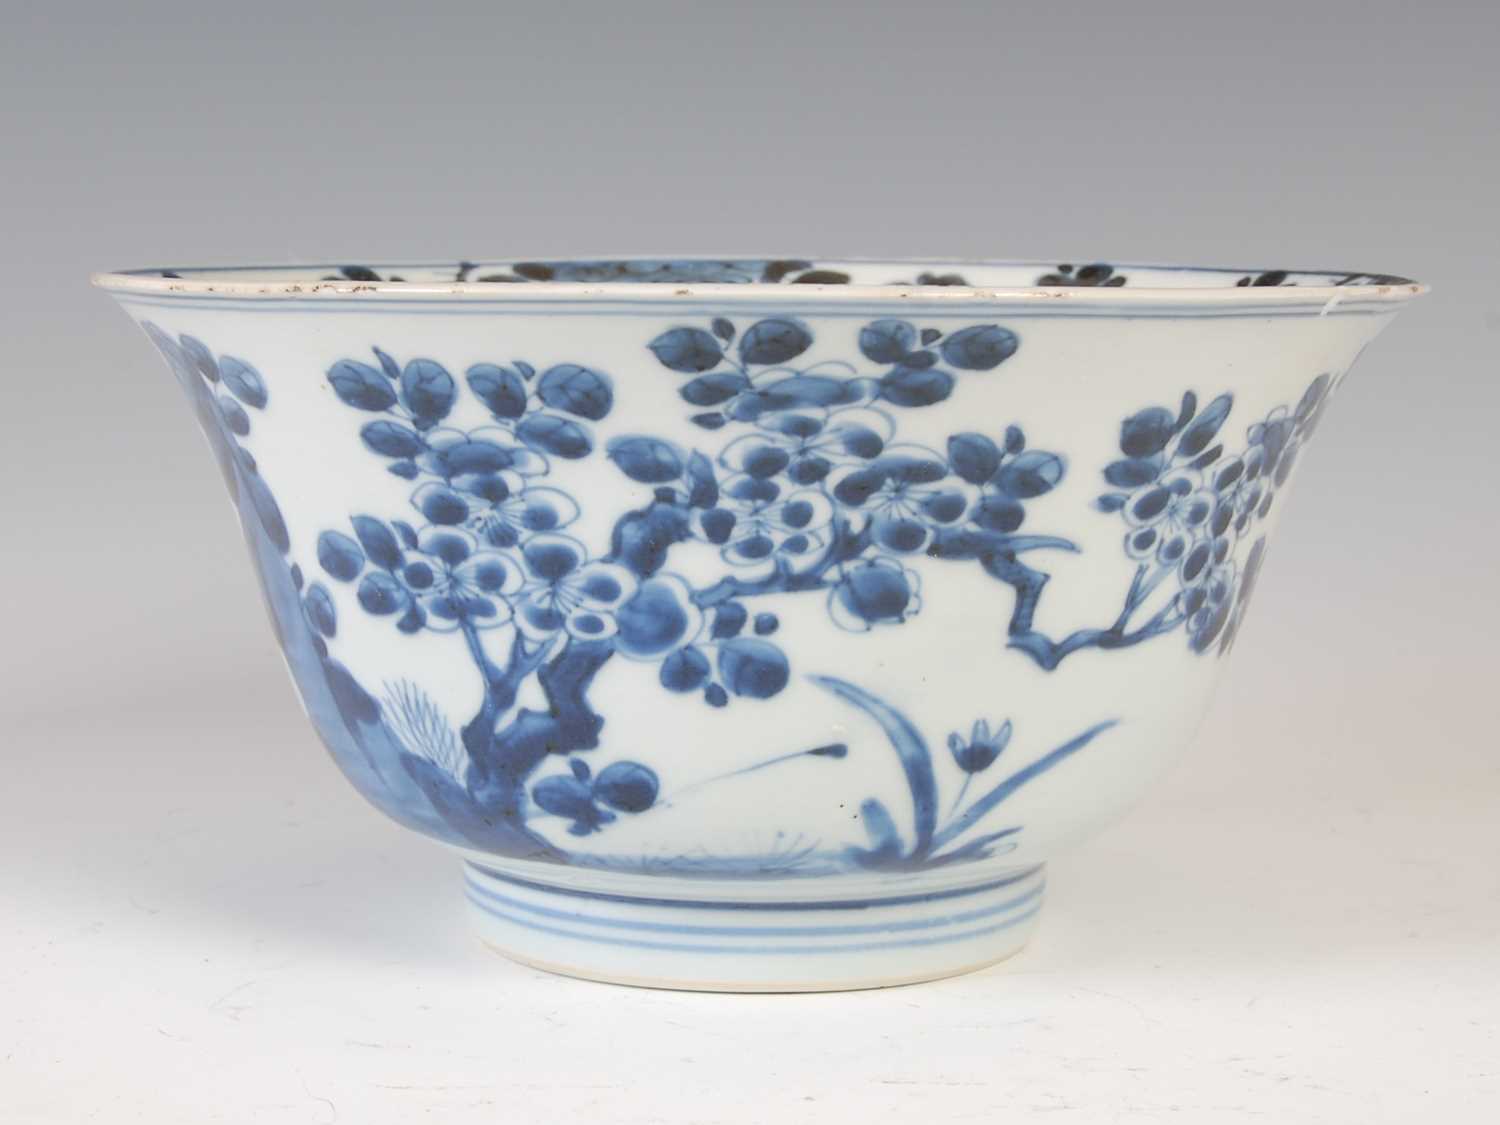 A Chinese porcelain blue and white bowl, Qing Dynasty, the exterior decorated with chrysanthemum, - Image 5 of 11